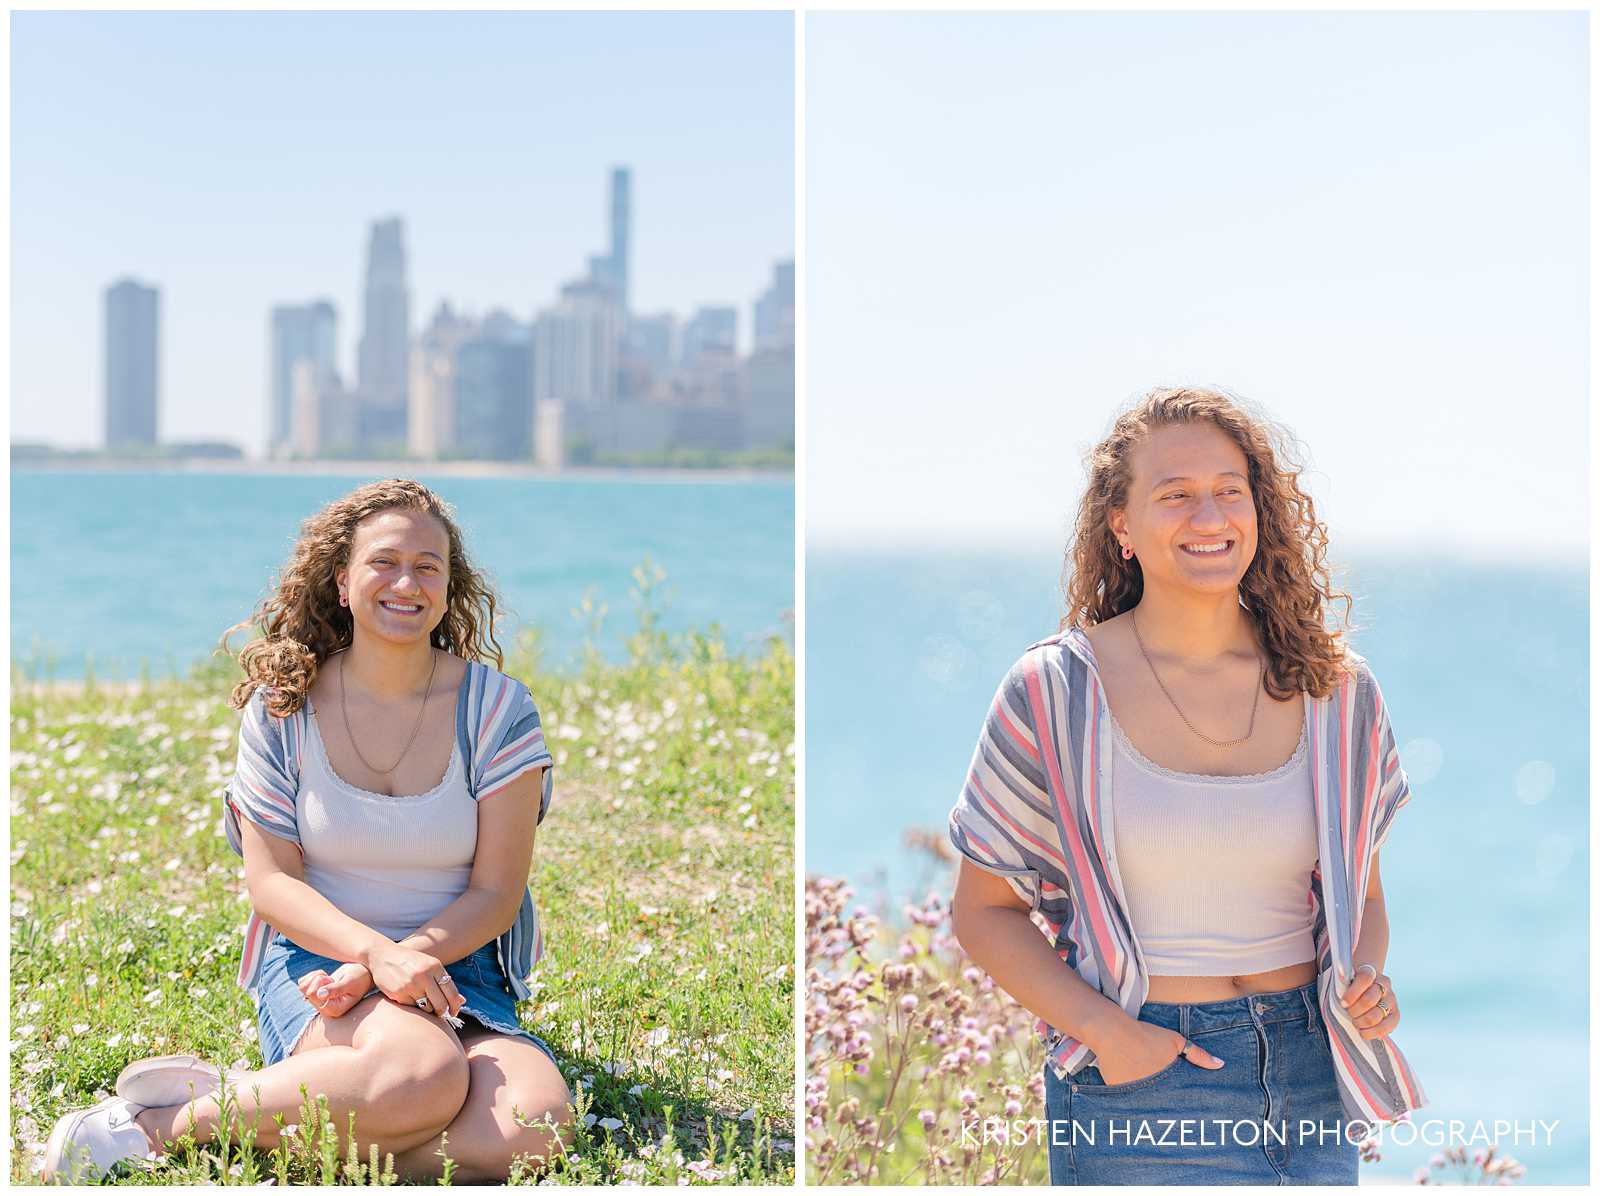 Happy high school senior girl with Lake Michigan and flowers